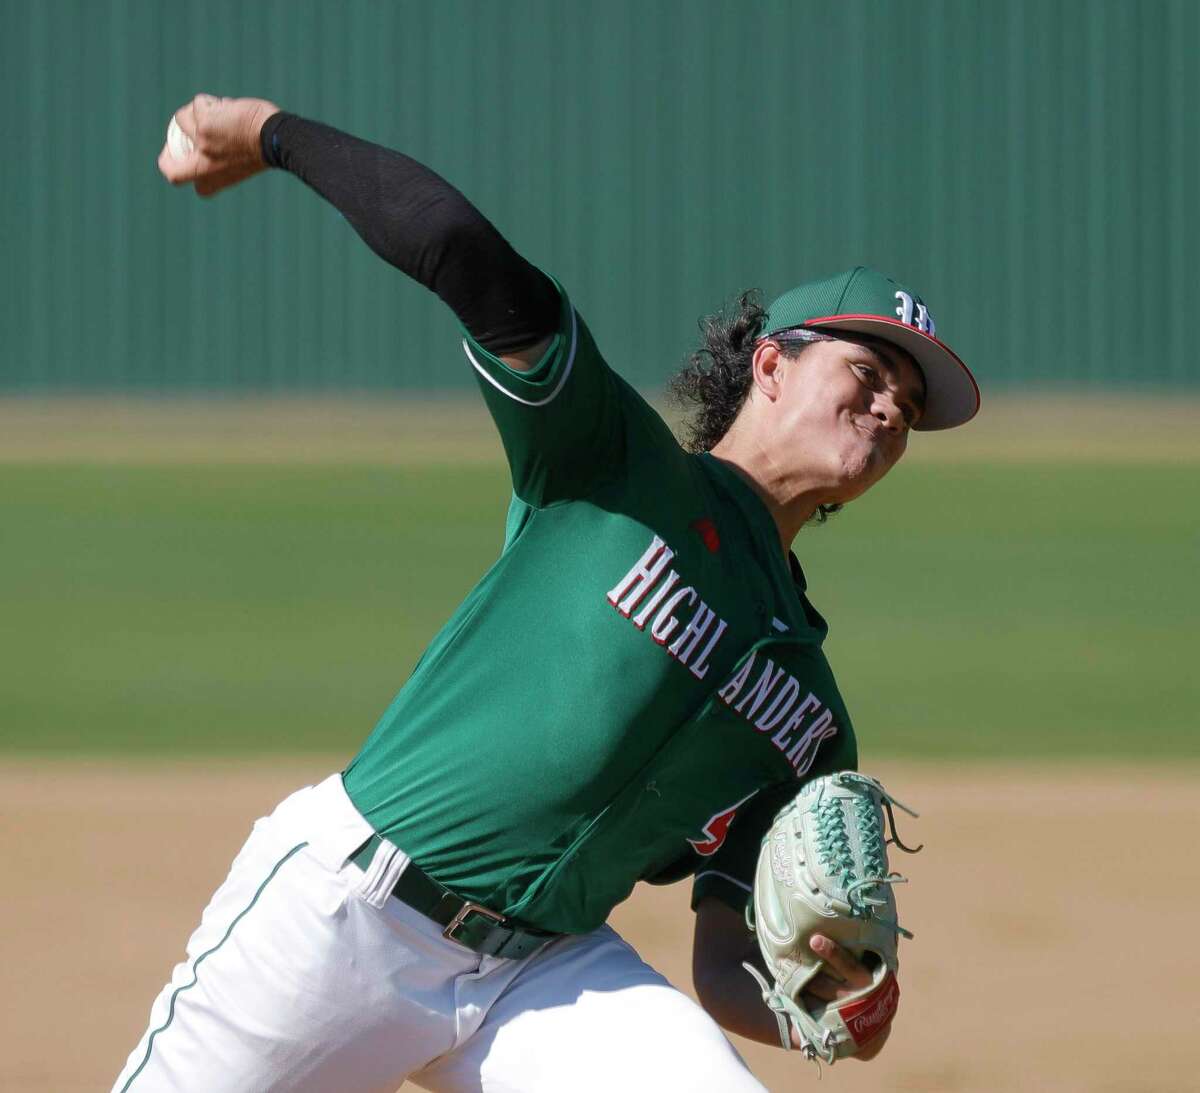 The Woodlands starting pitcher Ethan Coronel (4) throws in the second inning of a high school baseball game at Oak Ridge High School, March 16, 2022.